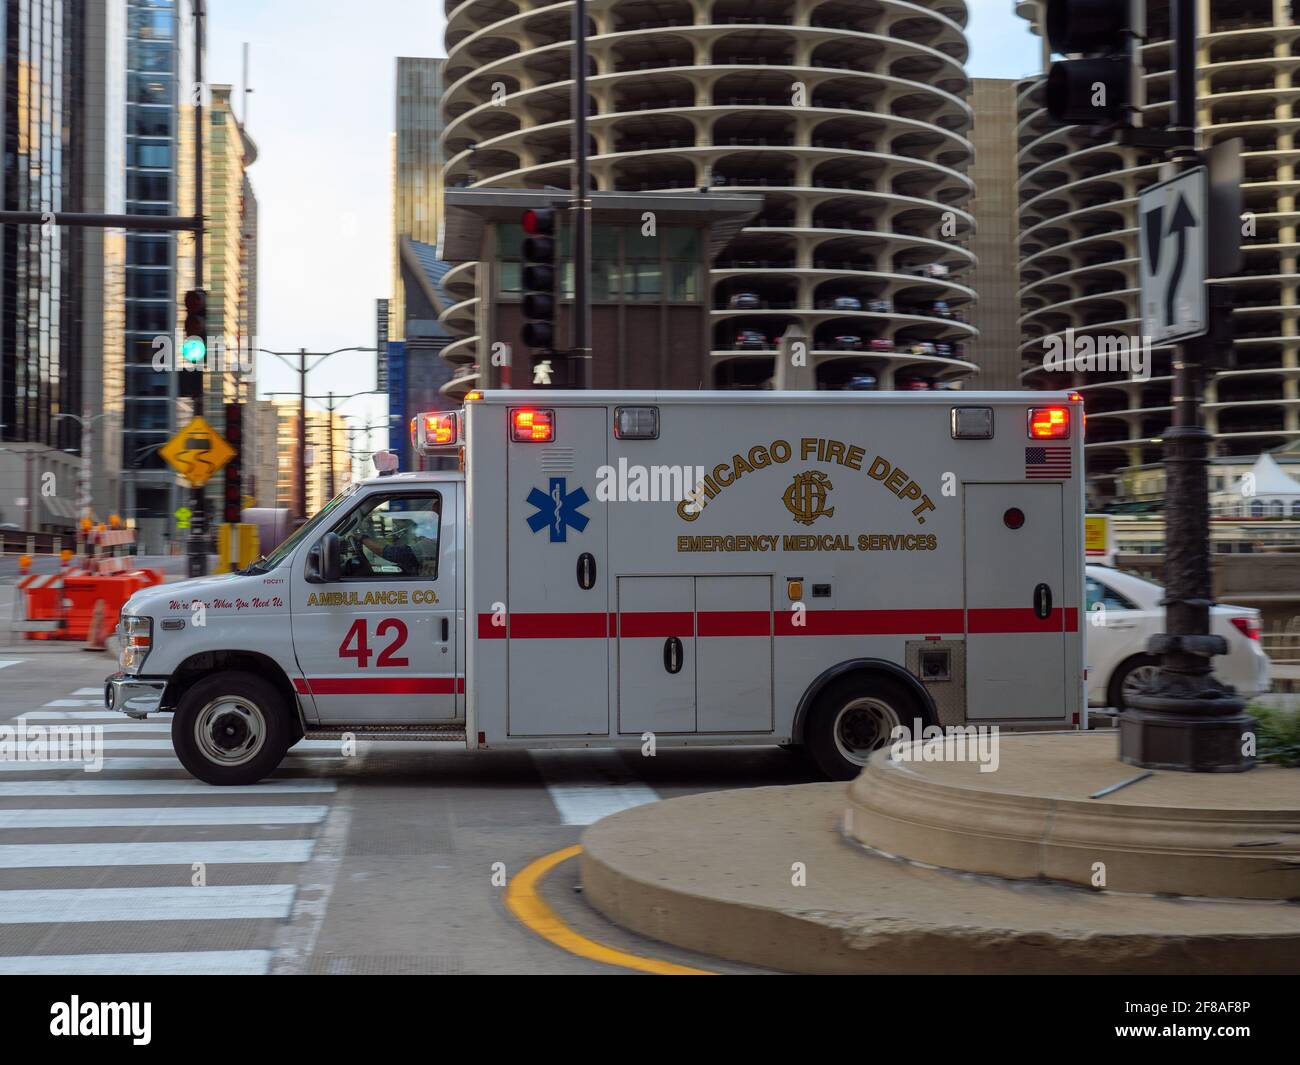 Chicago Fire Department ambulance. Stock Photo